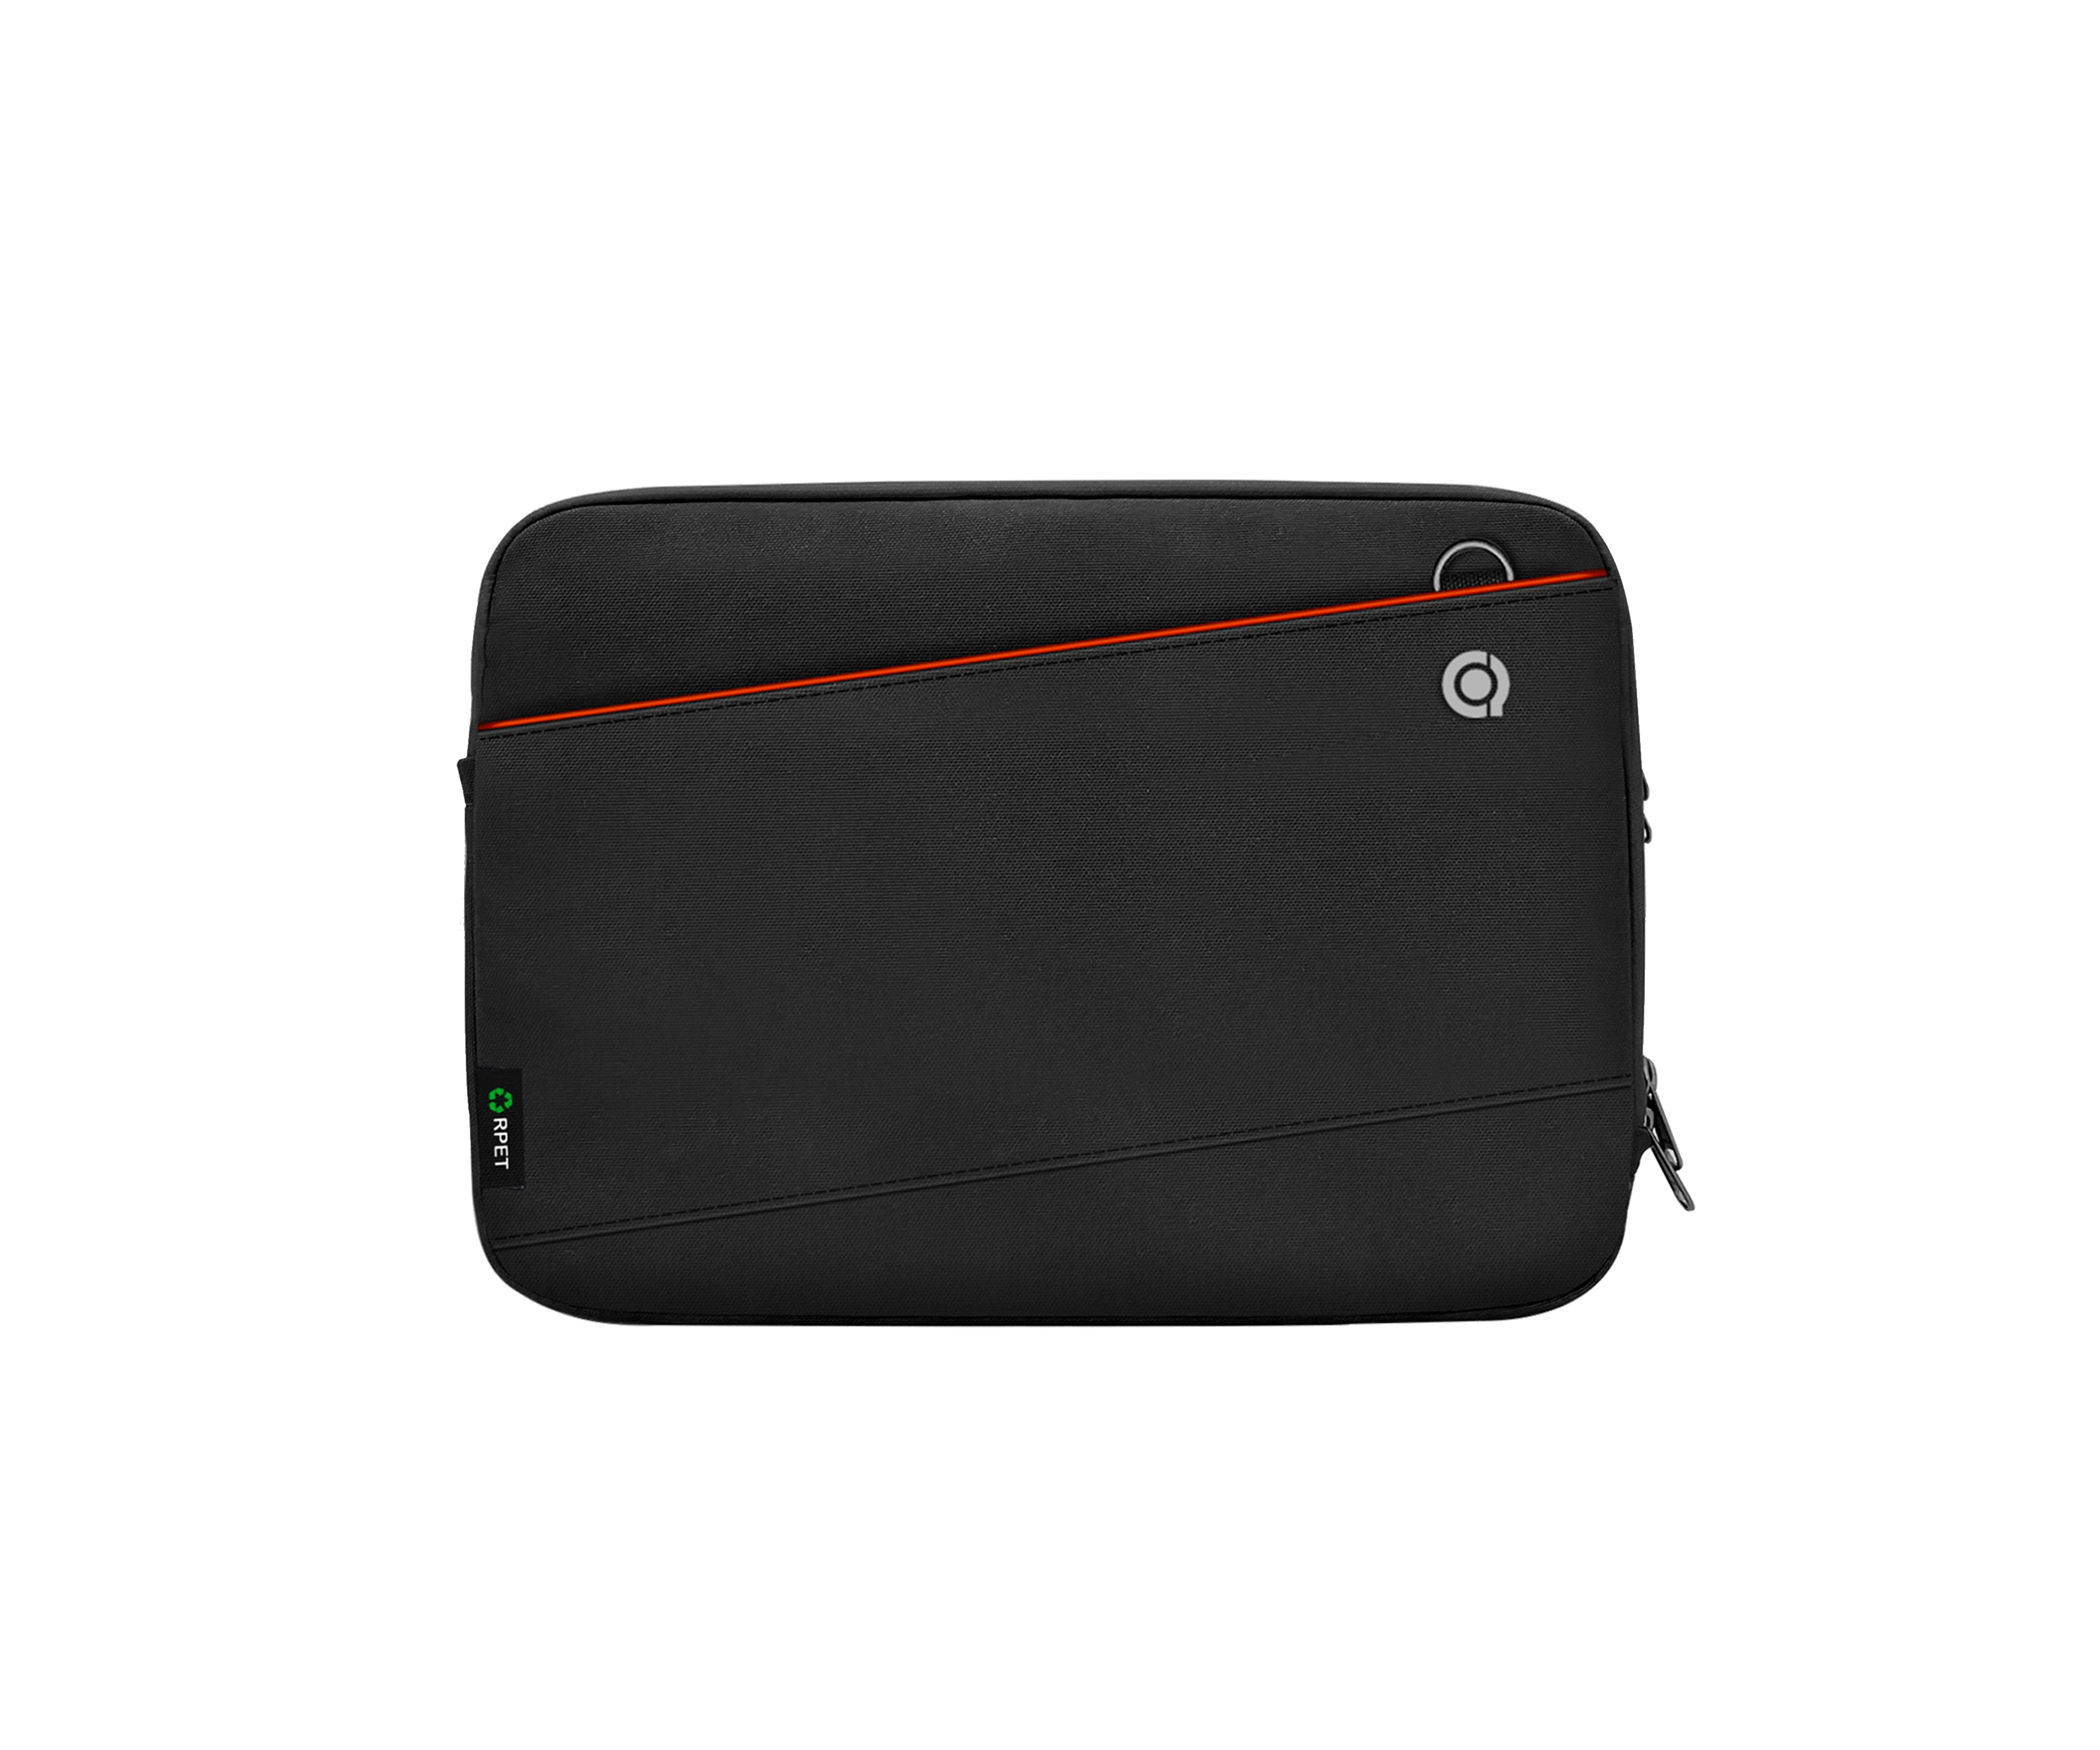 The Latest Trends in Cutom Laptop Sleeves/Cases